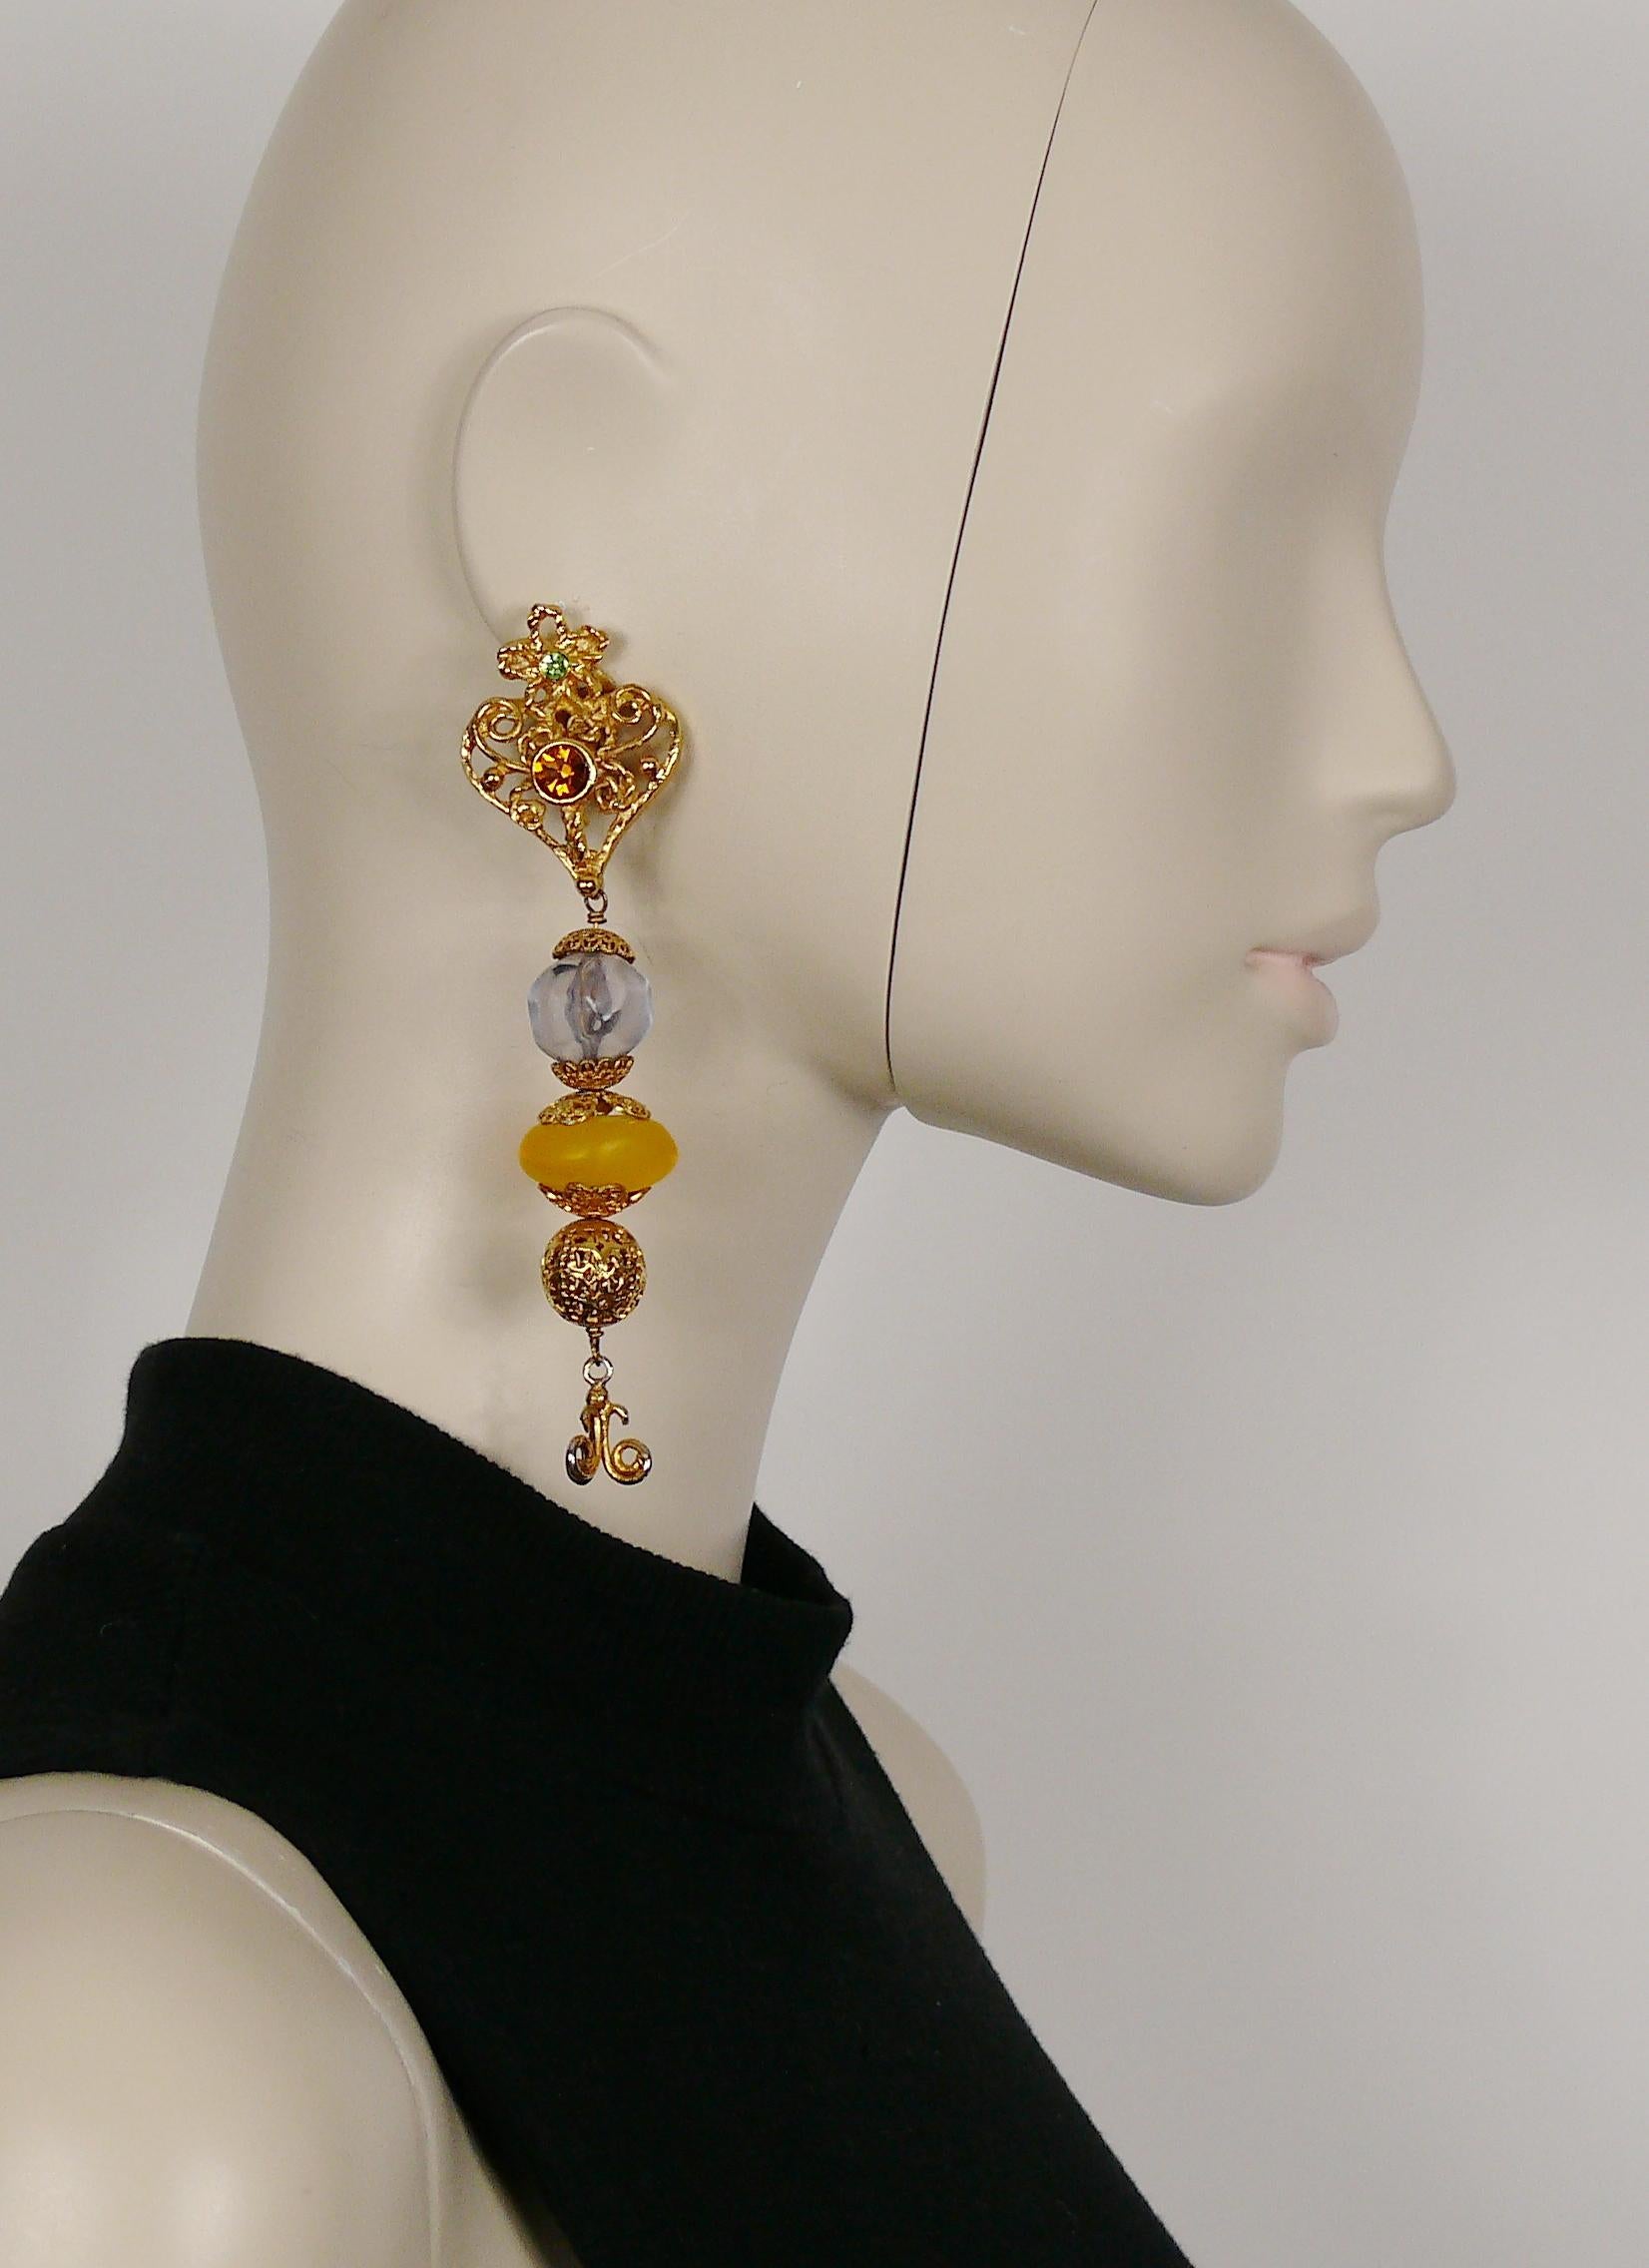 CHRISTIAN LACROIX vintage extra long gold toned dangling earrings (clip-on) featuring an openwork heart embellished with multicolor crystals and large resin beads.

Marked CHRISTIAN LACROIX CL Made in France.

Indicative measurements : height